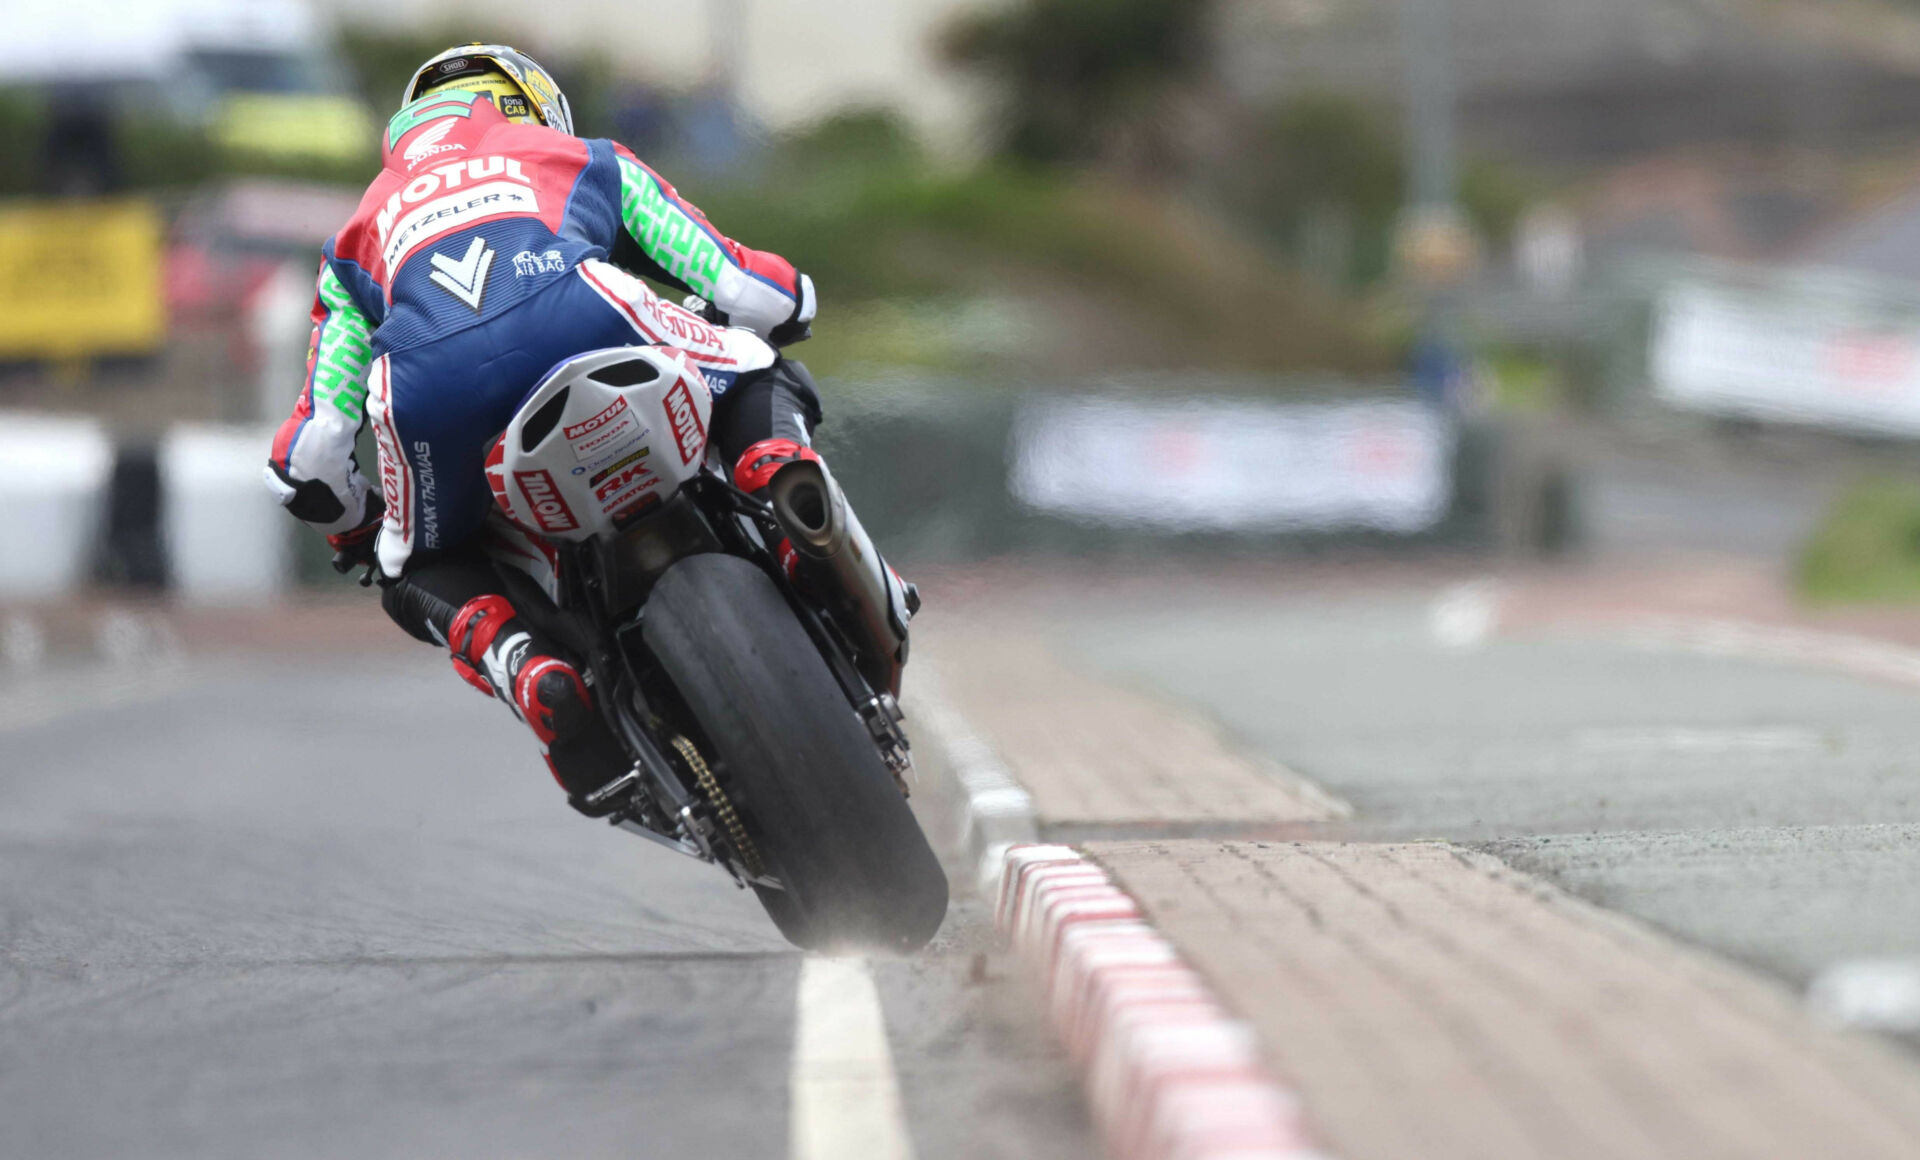 Glenn Irwin in action during qualifying Thursday at the North West 200. Photo courtesy North West 200 Press Office.